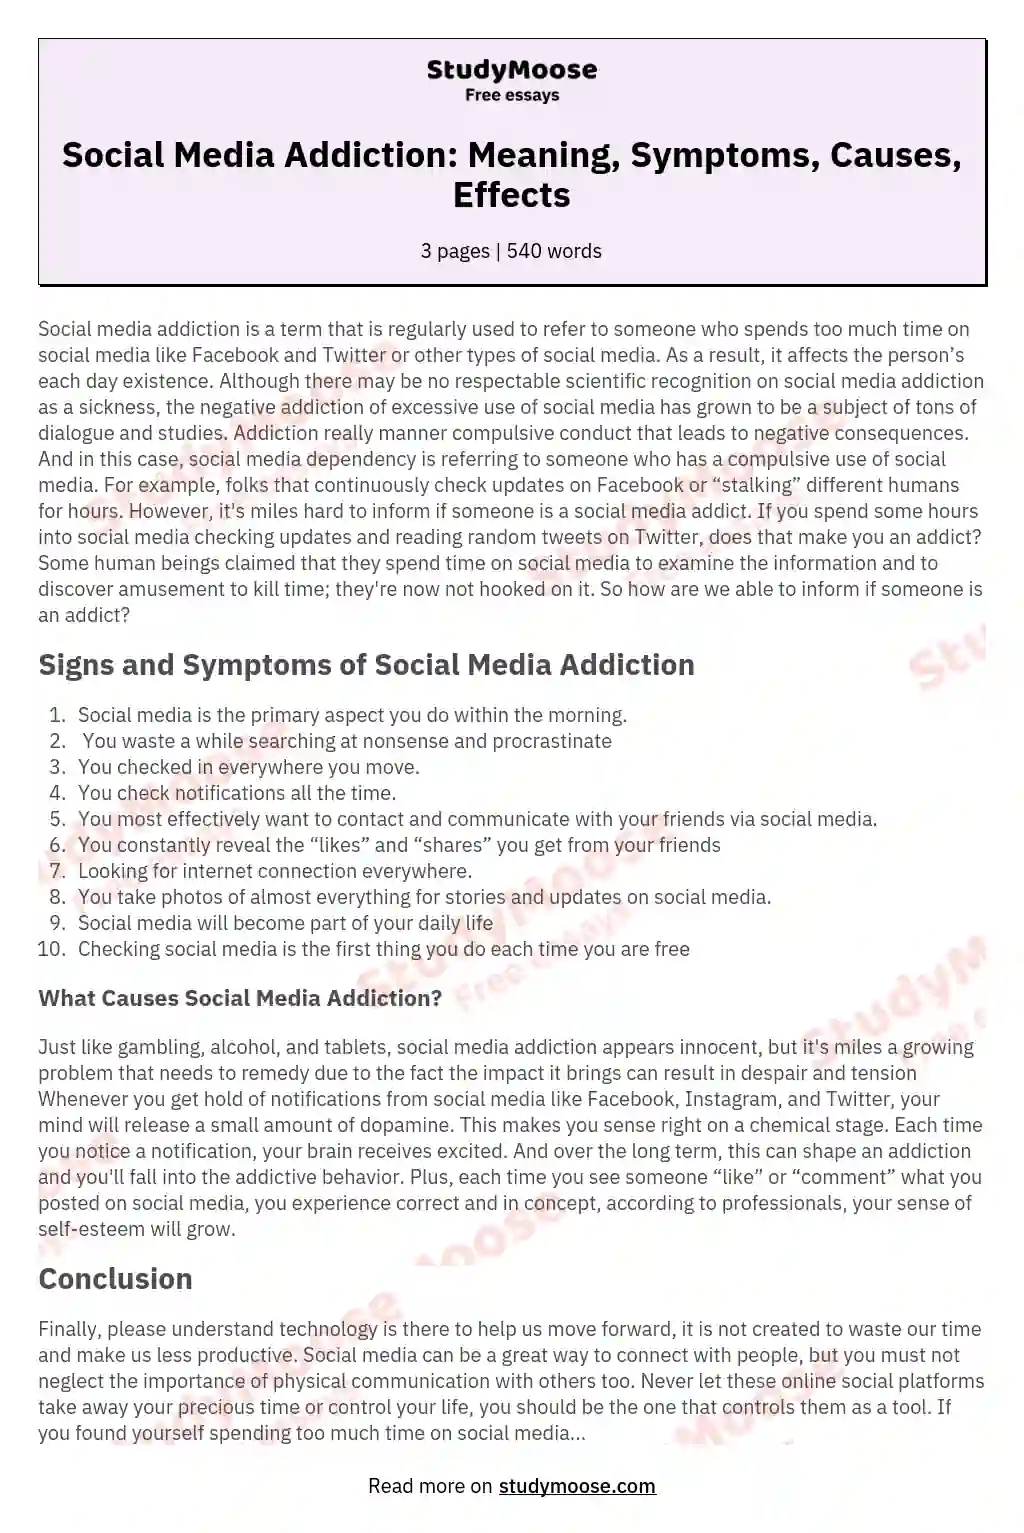 Social Media Addiction: Meaning, Symptoms, Causes, Effects